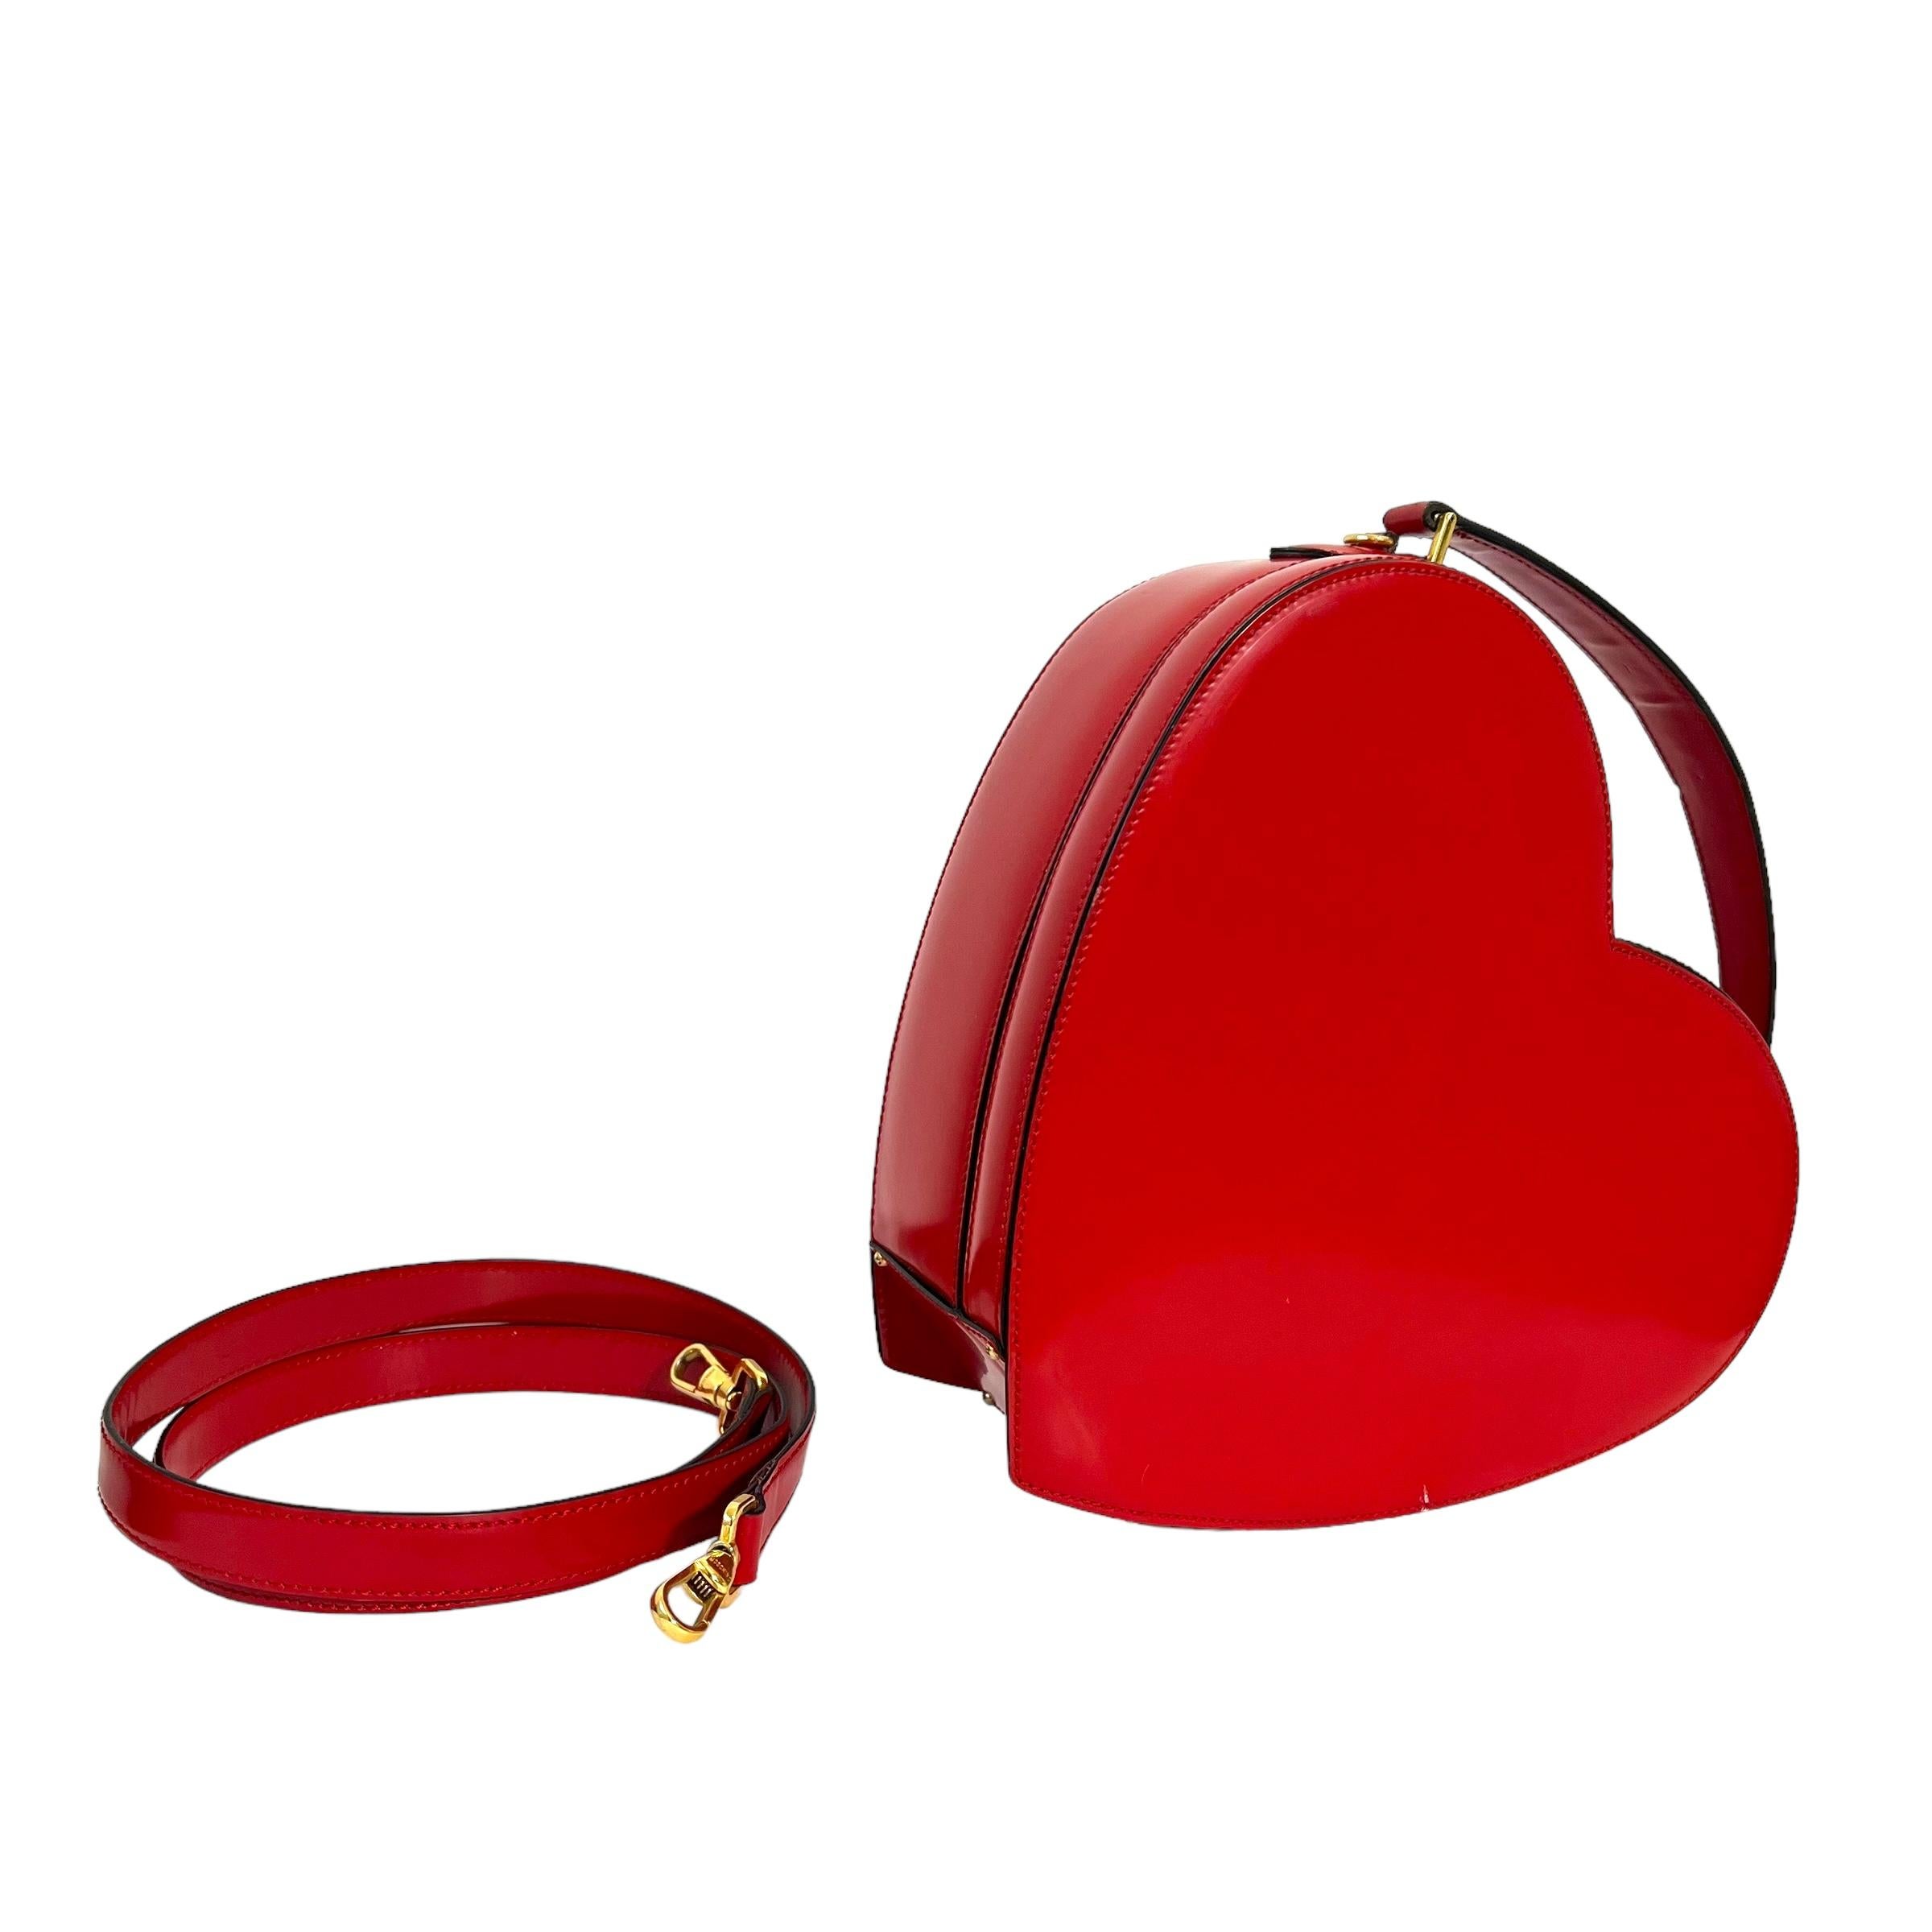 Crafted in Italy with high-quality red leather, the Moschino Heart Vintage heart bag is a true fashion icon. Its iconic heart design and elegant shape make it a standout accessory. With a variety of carrying options including a shoulder strap